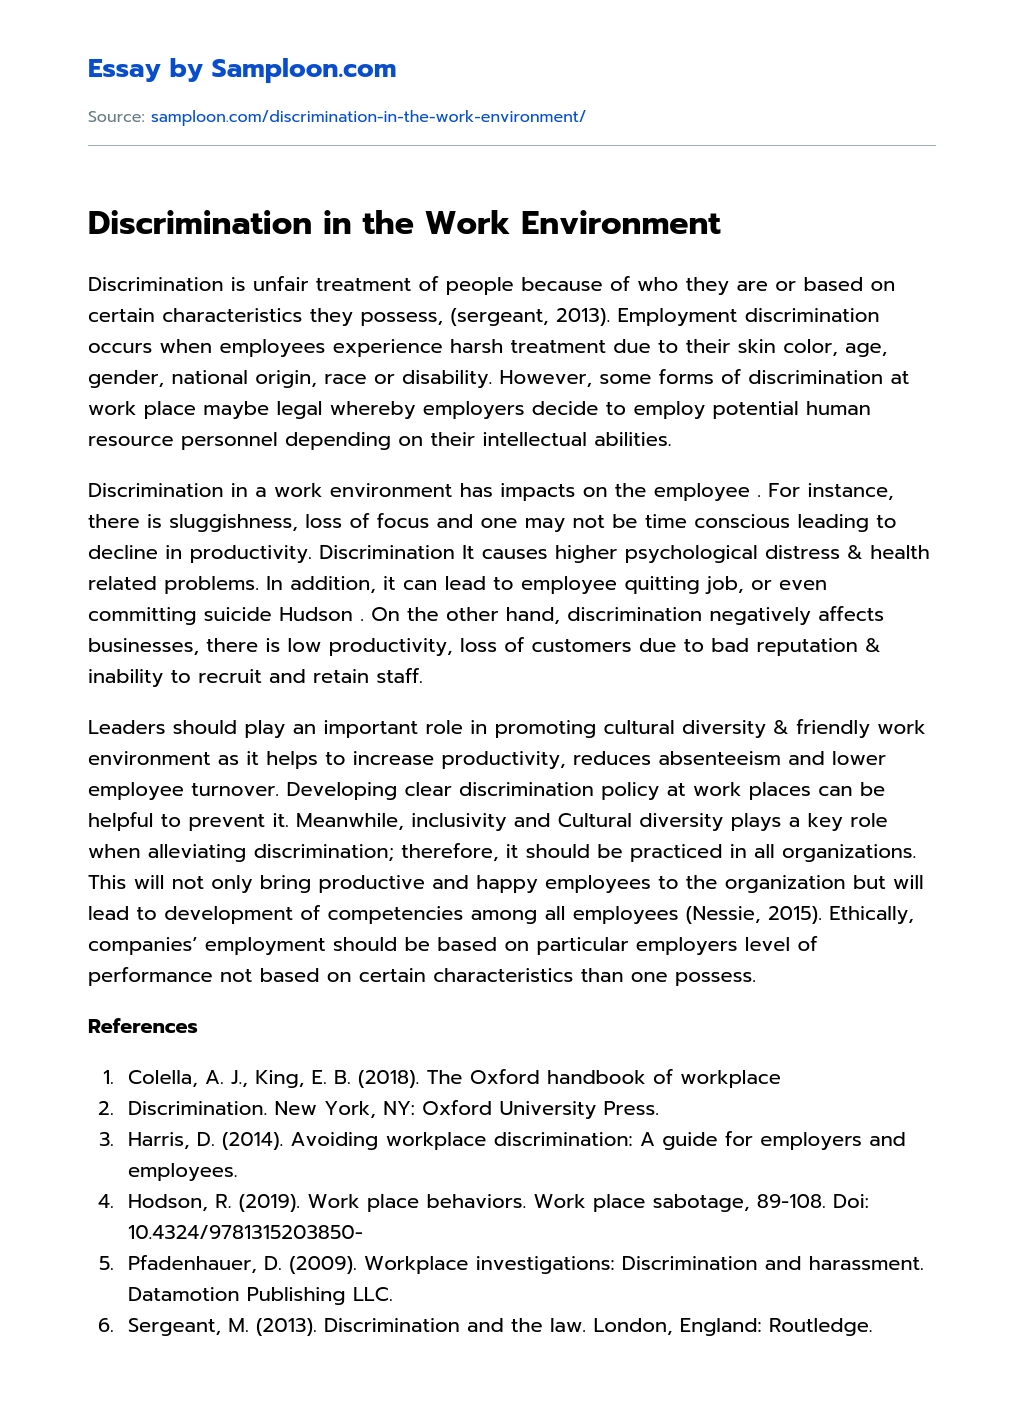 Discrimination in the Work Environment essay